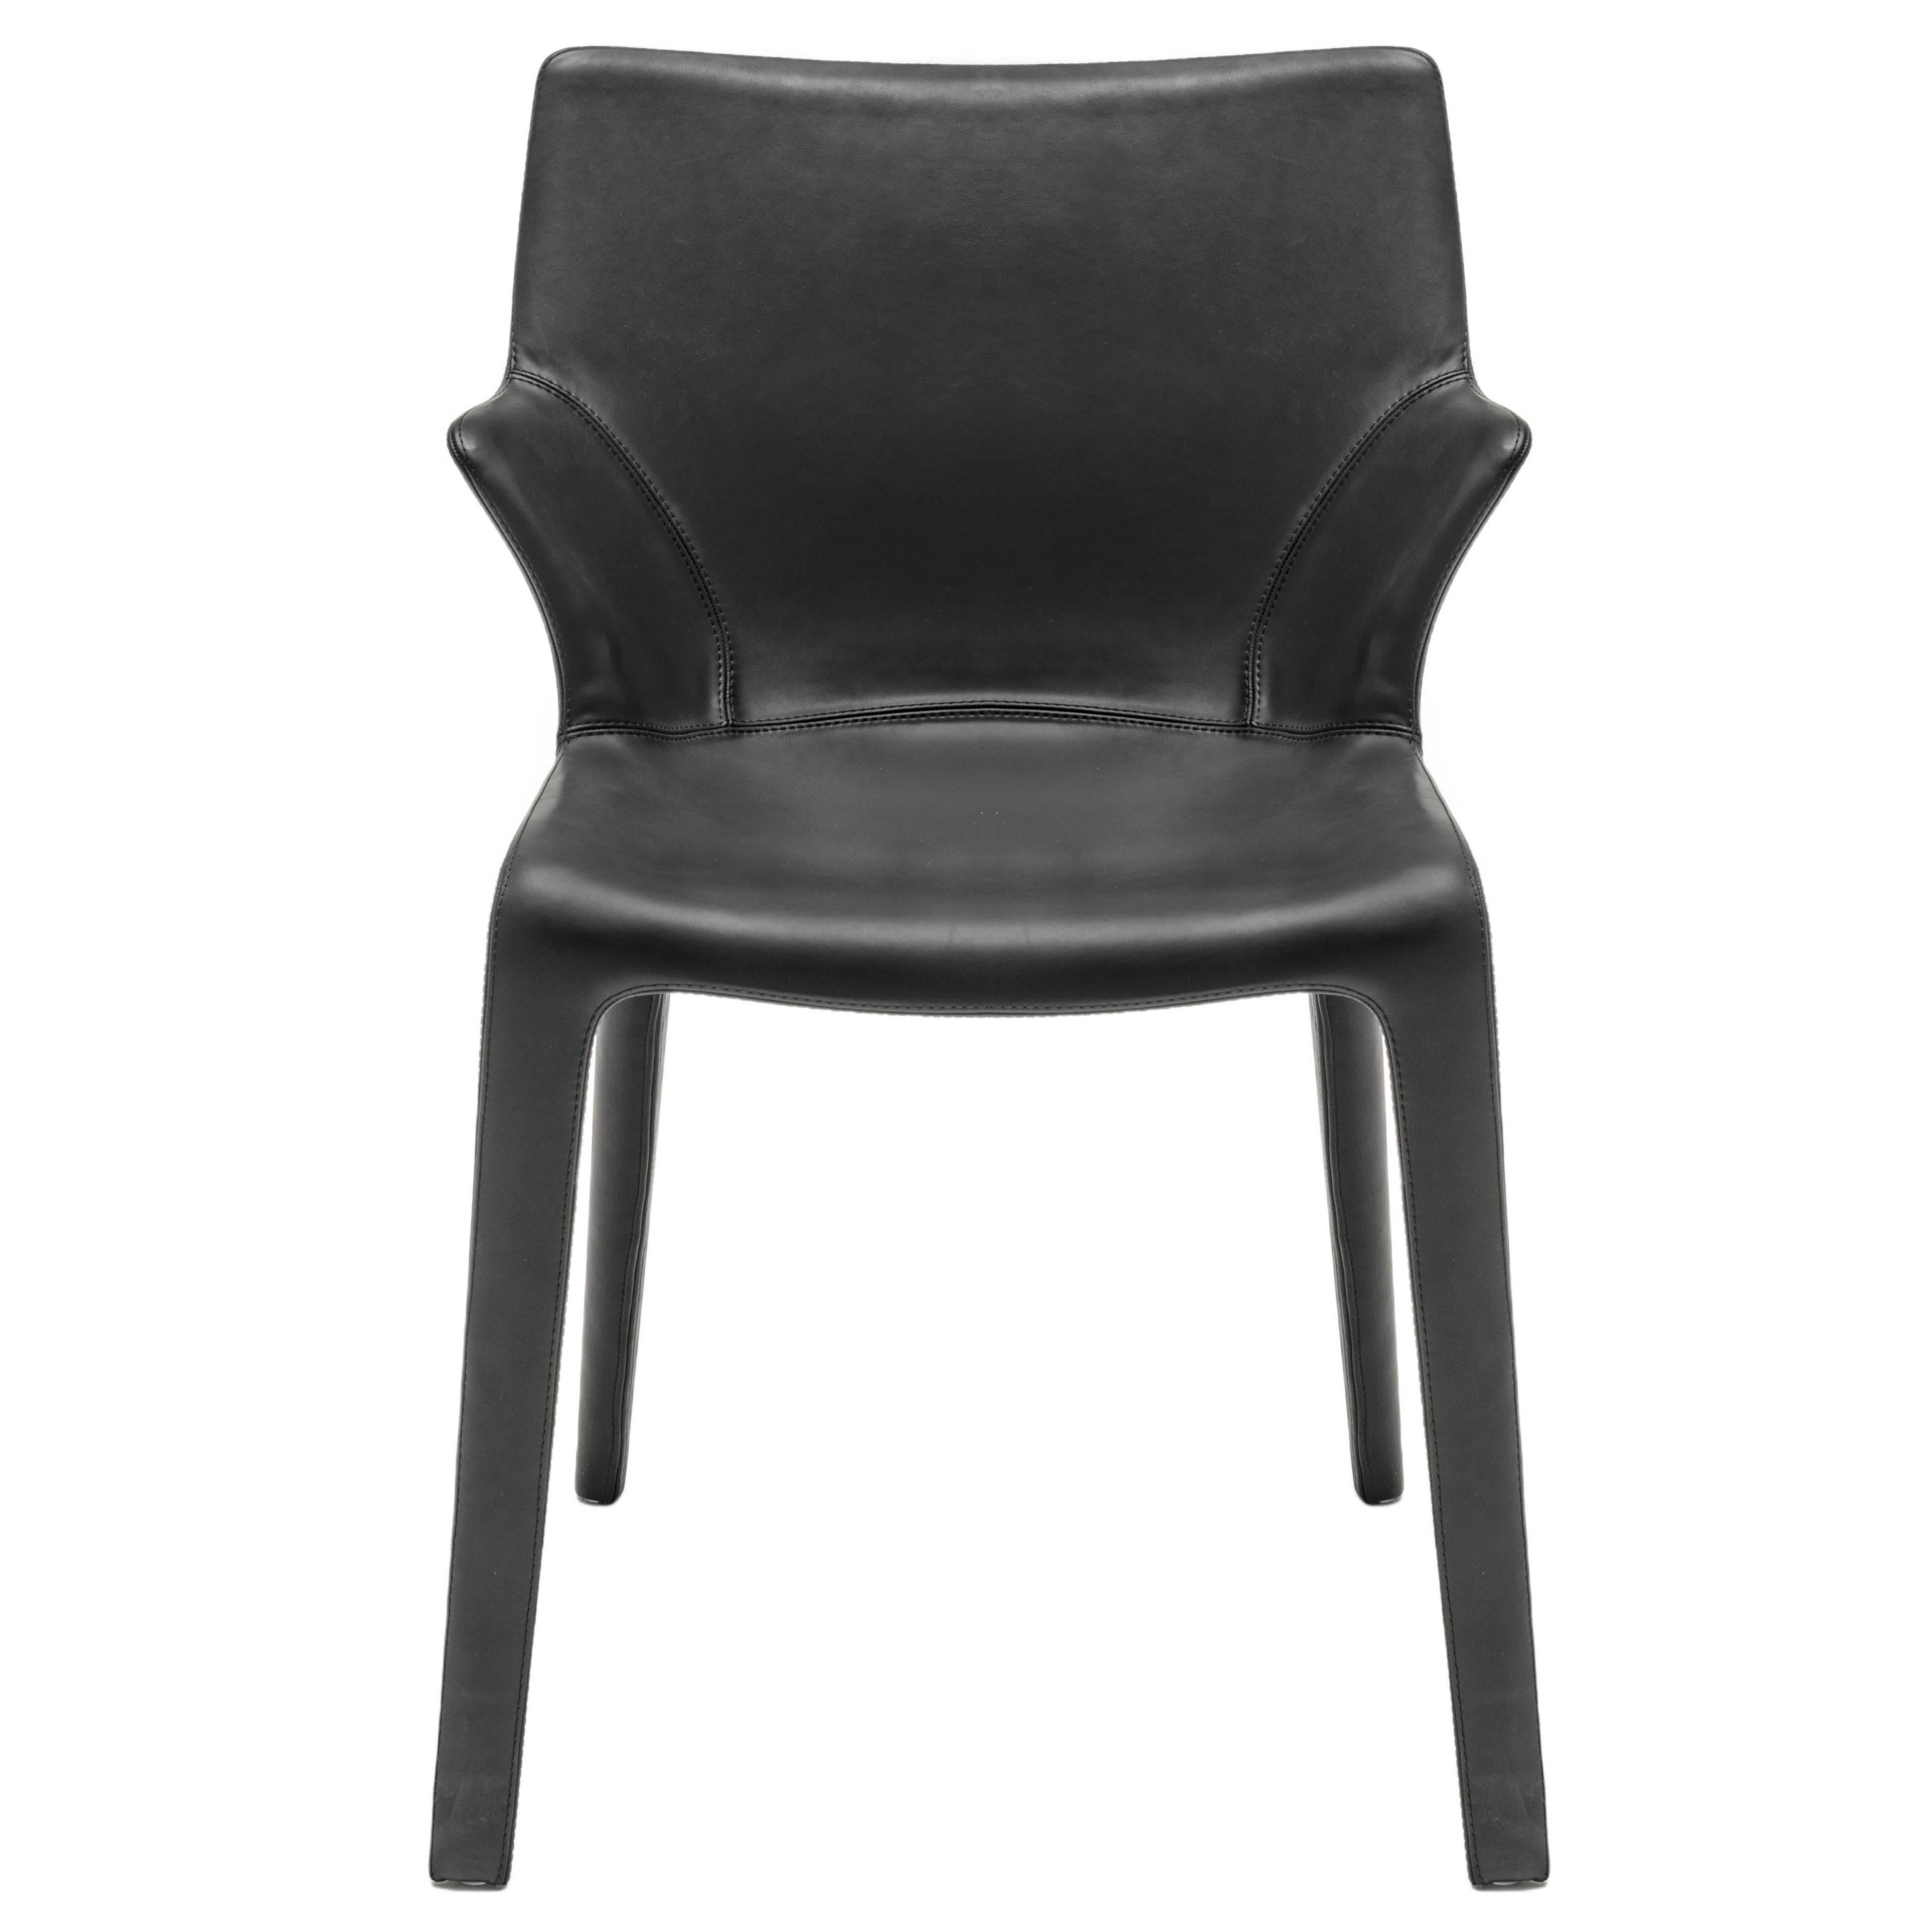 "Lou Eat" Leather Dining Chair Designed by Philippe Starck for Driade